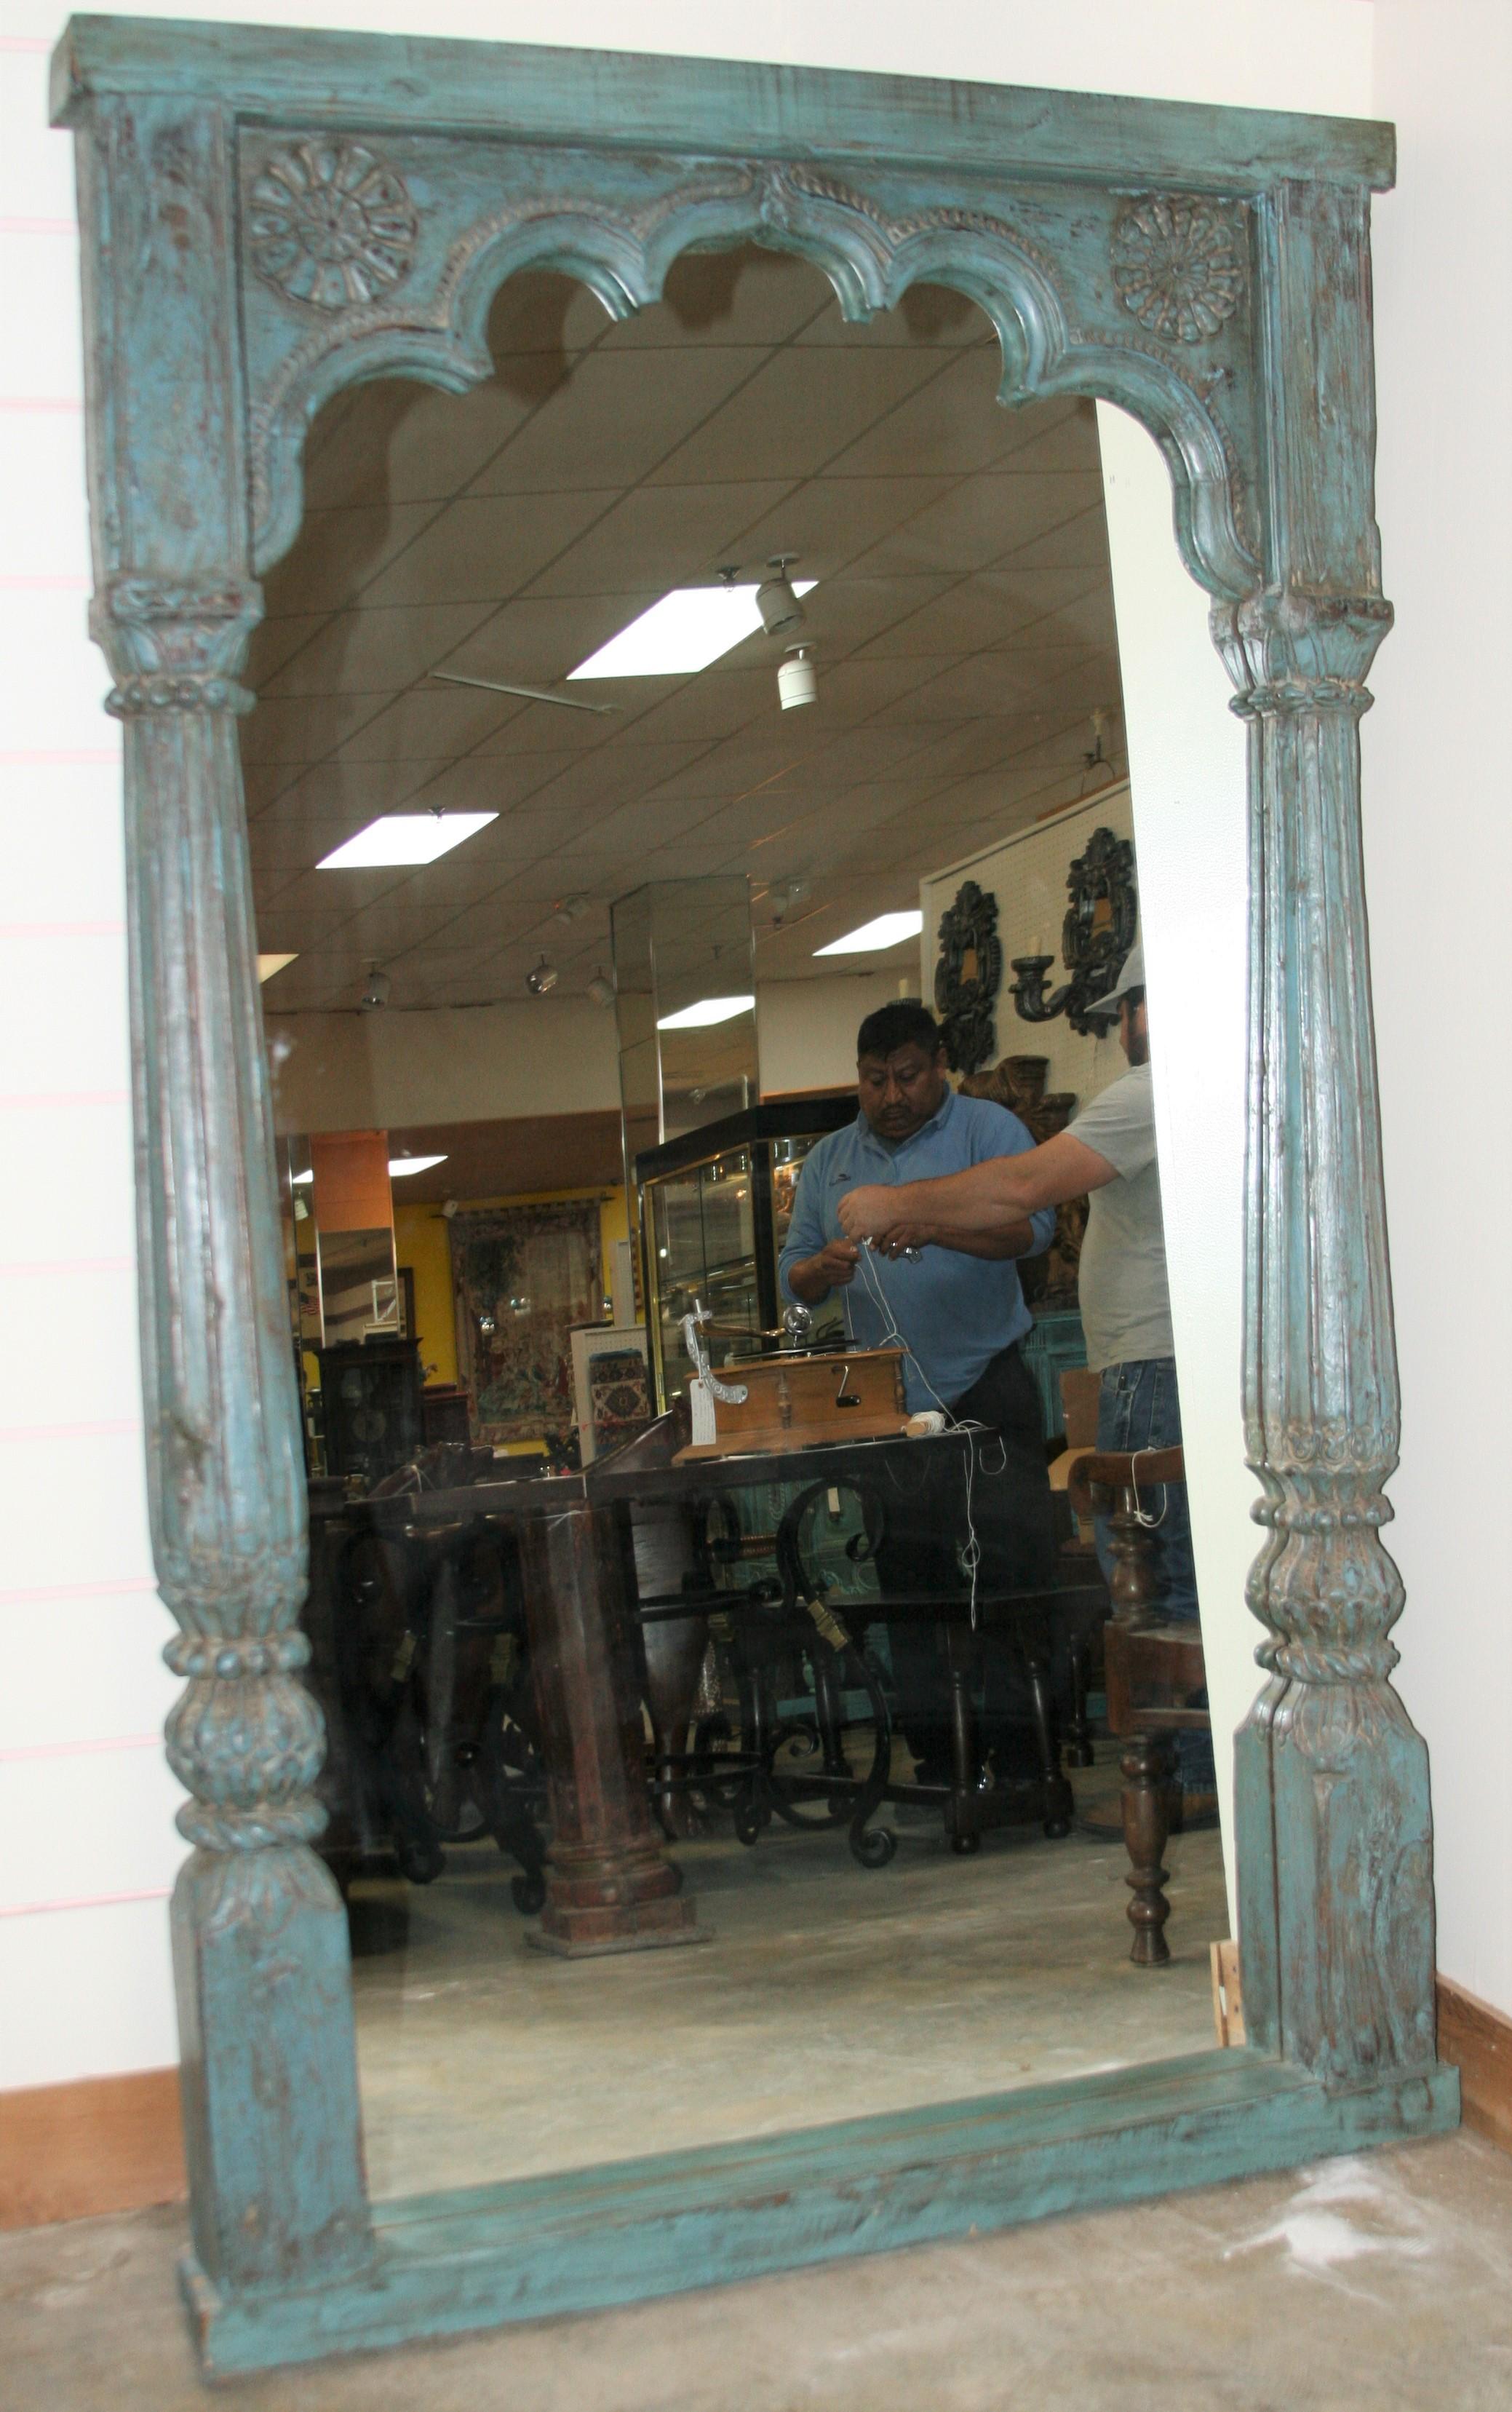 The solid teak wood frame for this large mirror comes from an old fort. In the long corridors of the forts these highly carved arches served as open windows. Exceptional hand carving. Retains original painting. Carved on both sides. Motif is